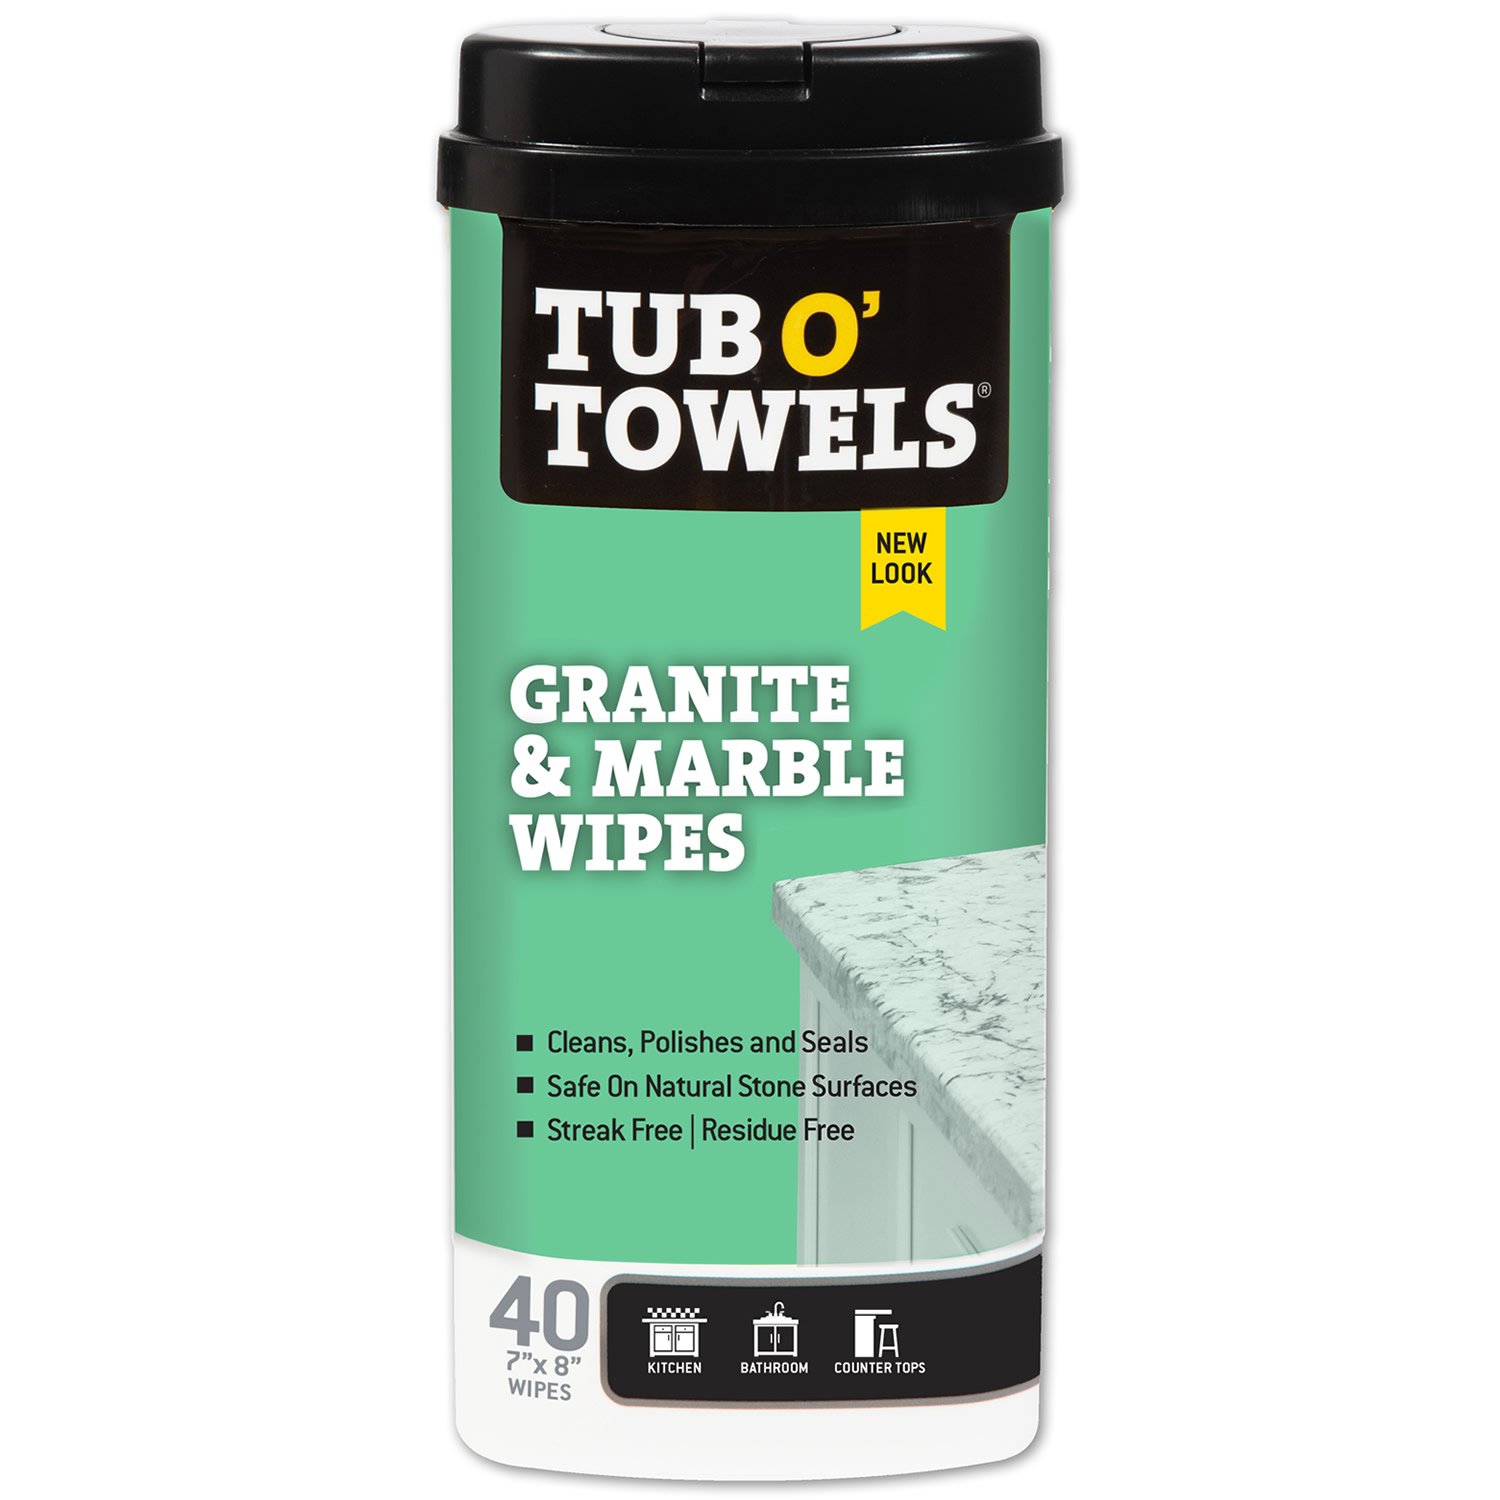 TUB O' TOWELS TW40-GR Heavy-Duty Cleaning Wipes, 8 in W, 7 in L, Mild, 40 Wipes, Canister